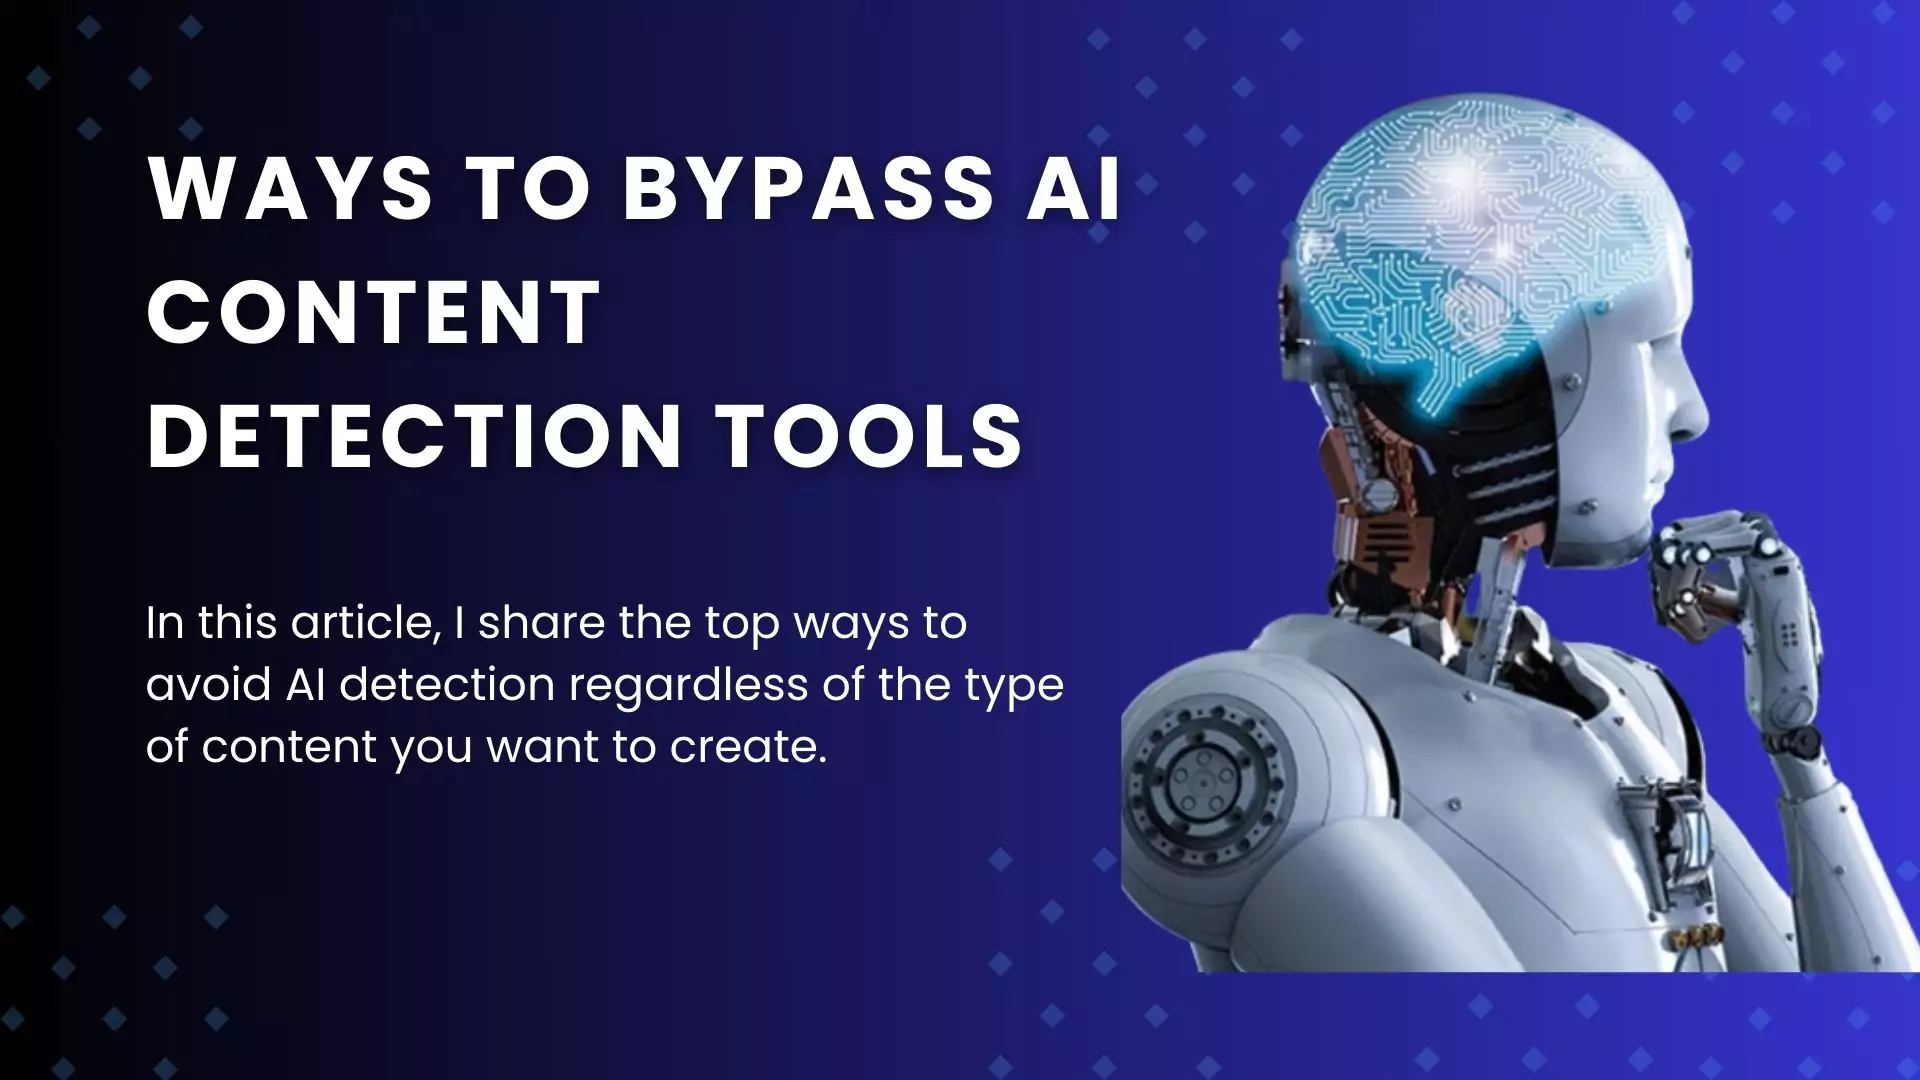 featured-image-ways-to-bypass-ai-content-detection-tools